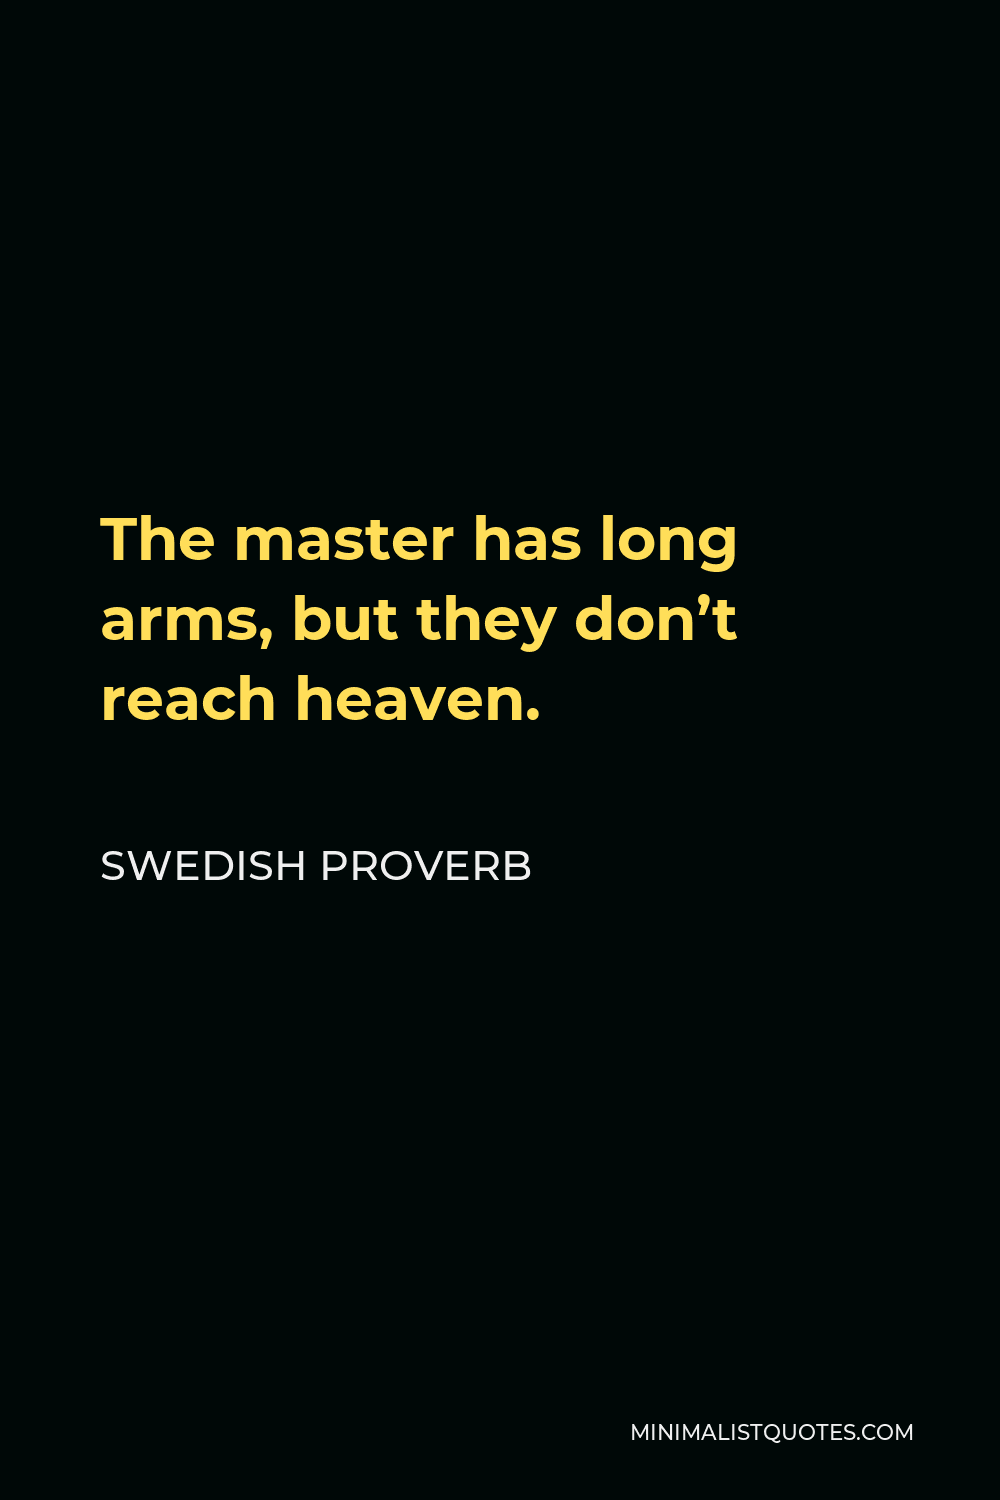 Swedish Proverb Quote - The master has long arms, but they don’t reach heaven.